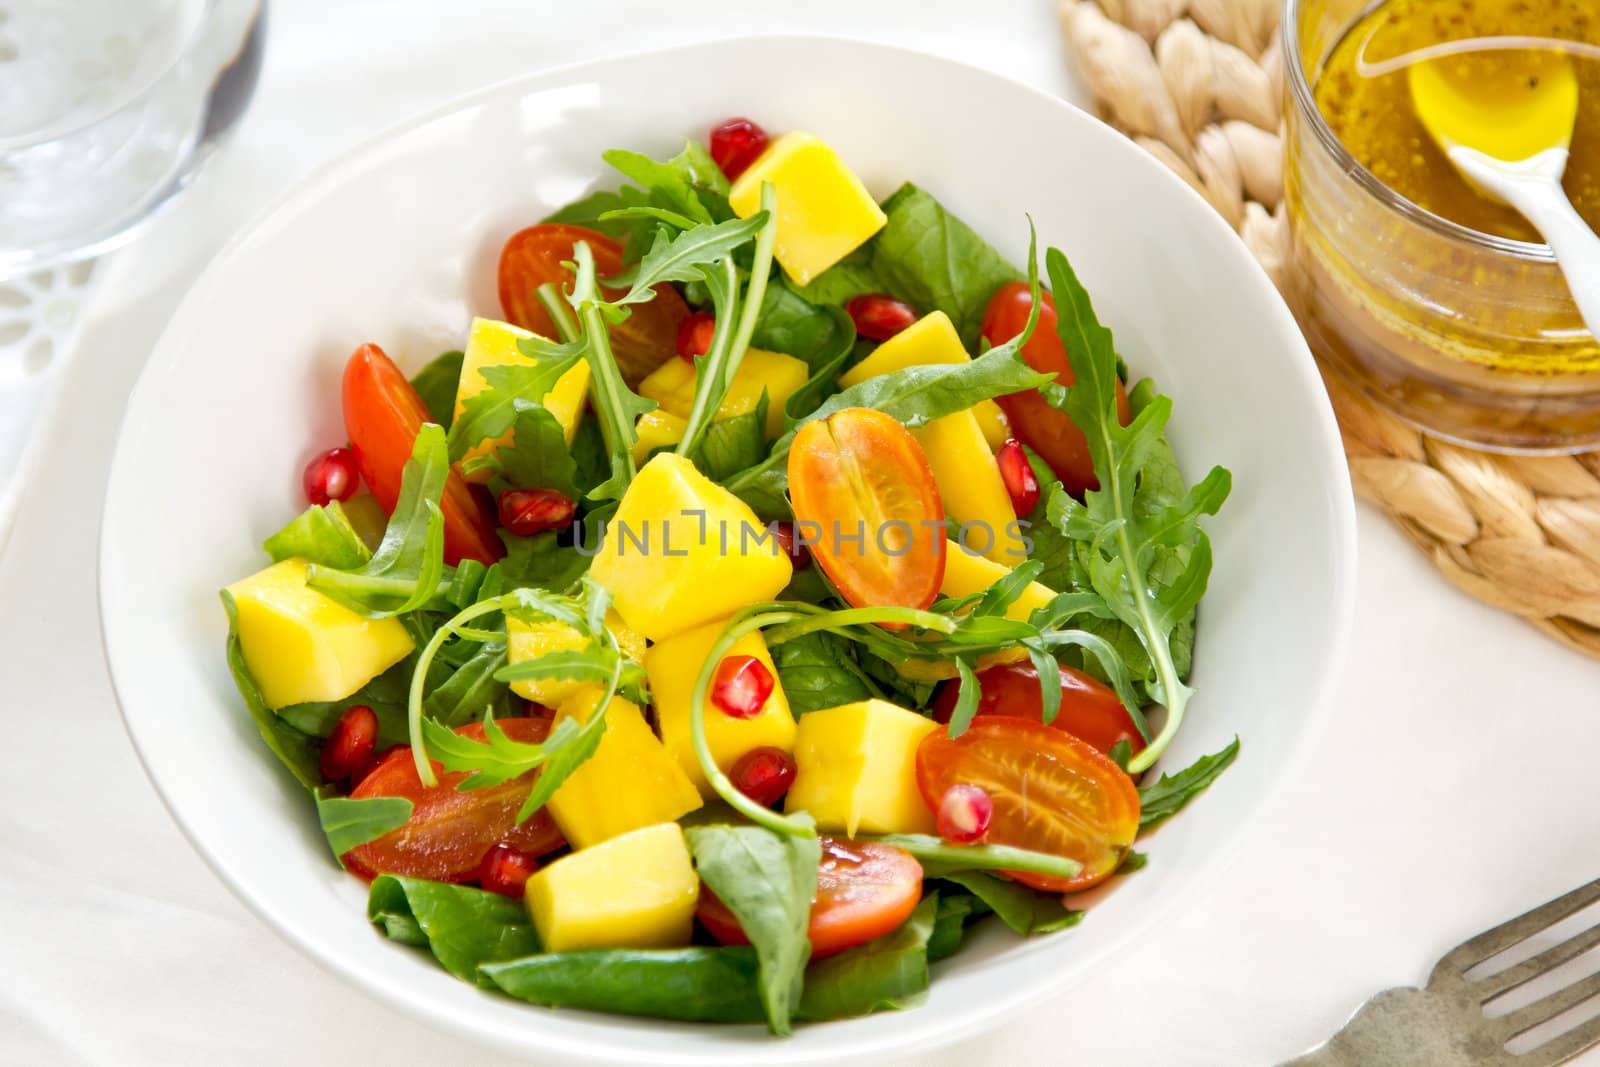 Mango,Pomegranate and cherry tomato with rocket salad in a bowl by vinaigrette